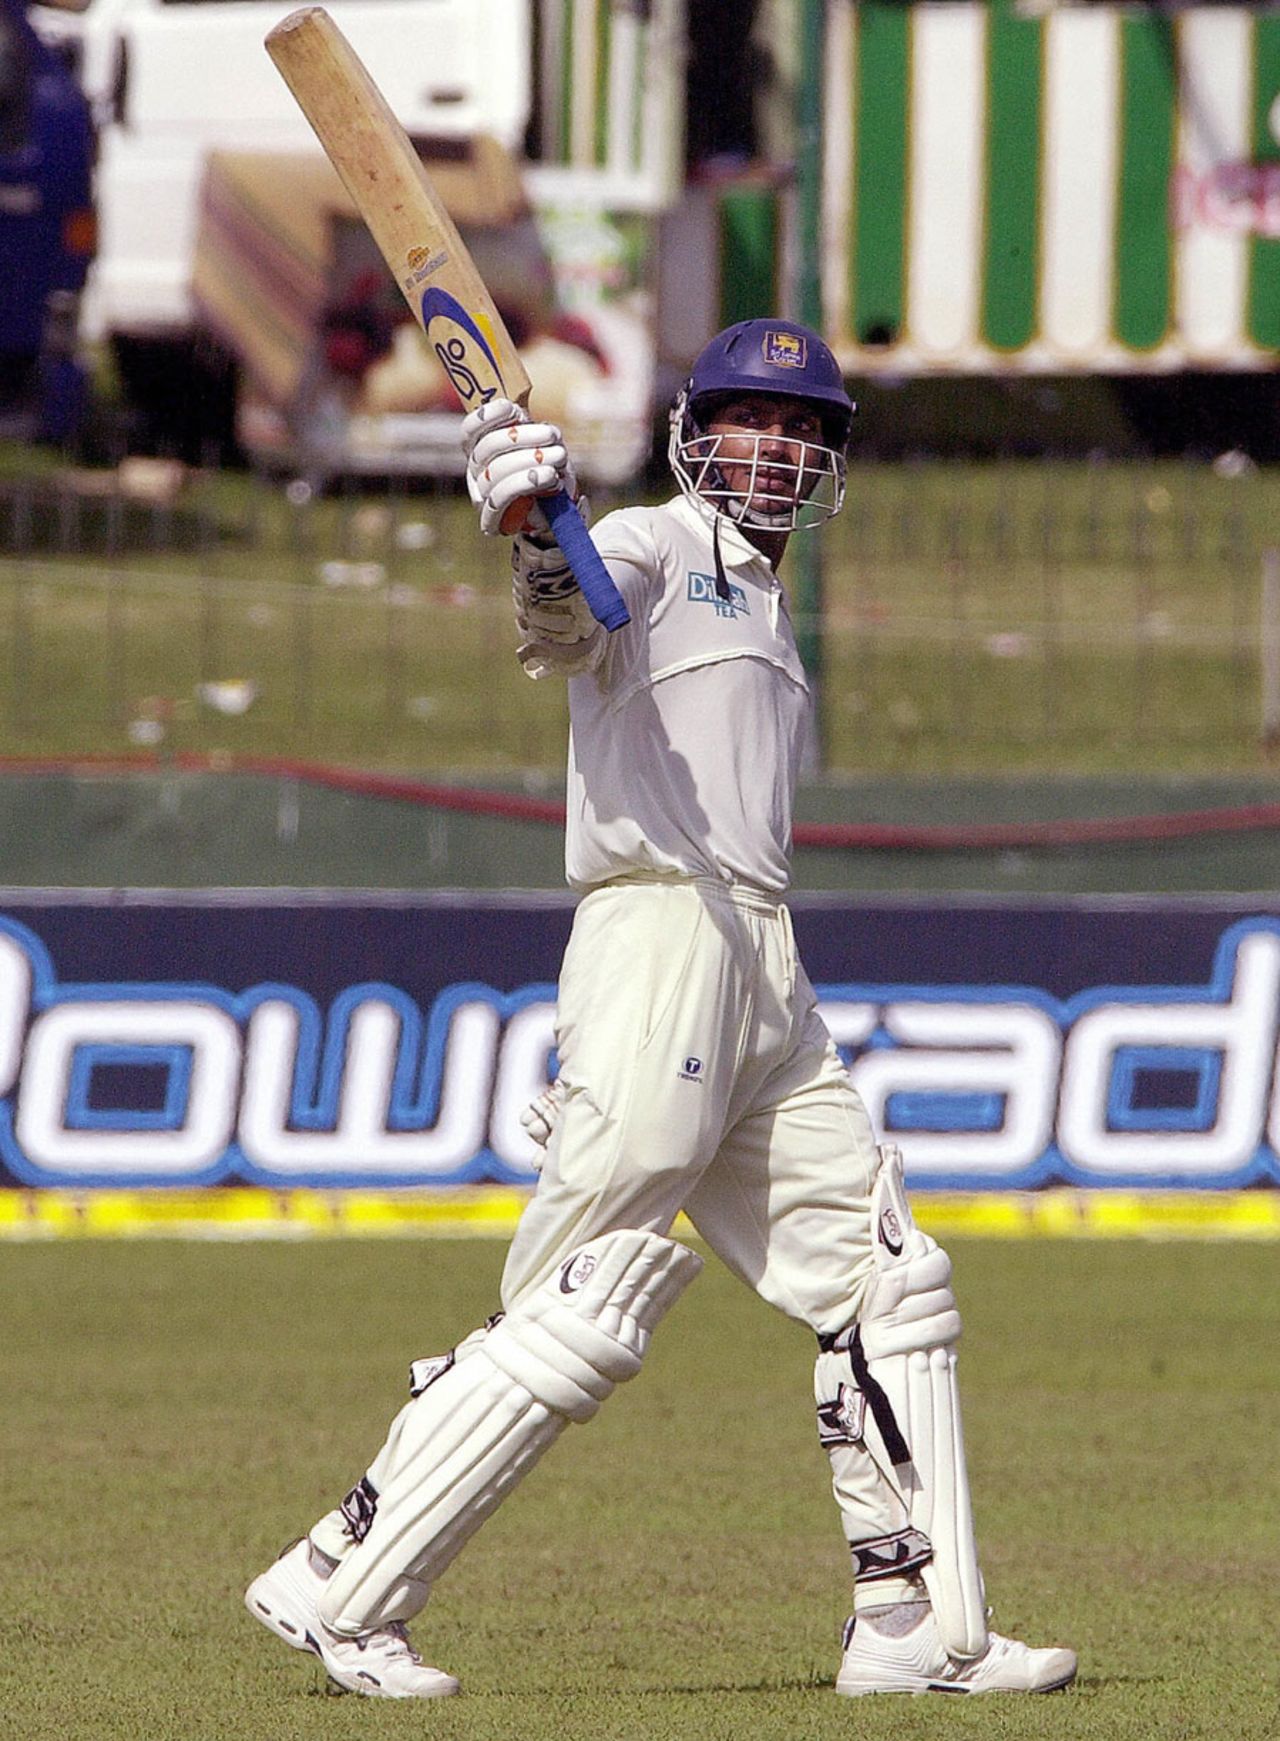 Kumar Sangakkara takes in the applause for his century, Sri Lanka v South Africa, 2nd Test, Day 1, SSC, Colombo, August 11, 2004